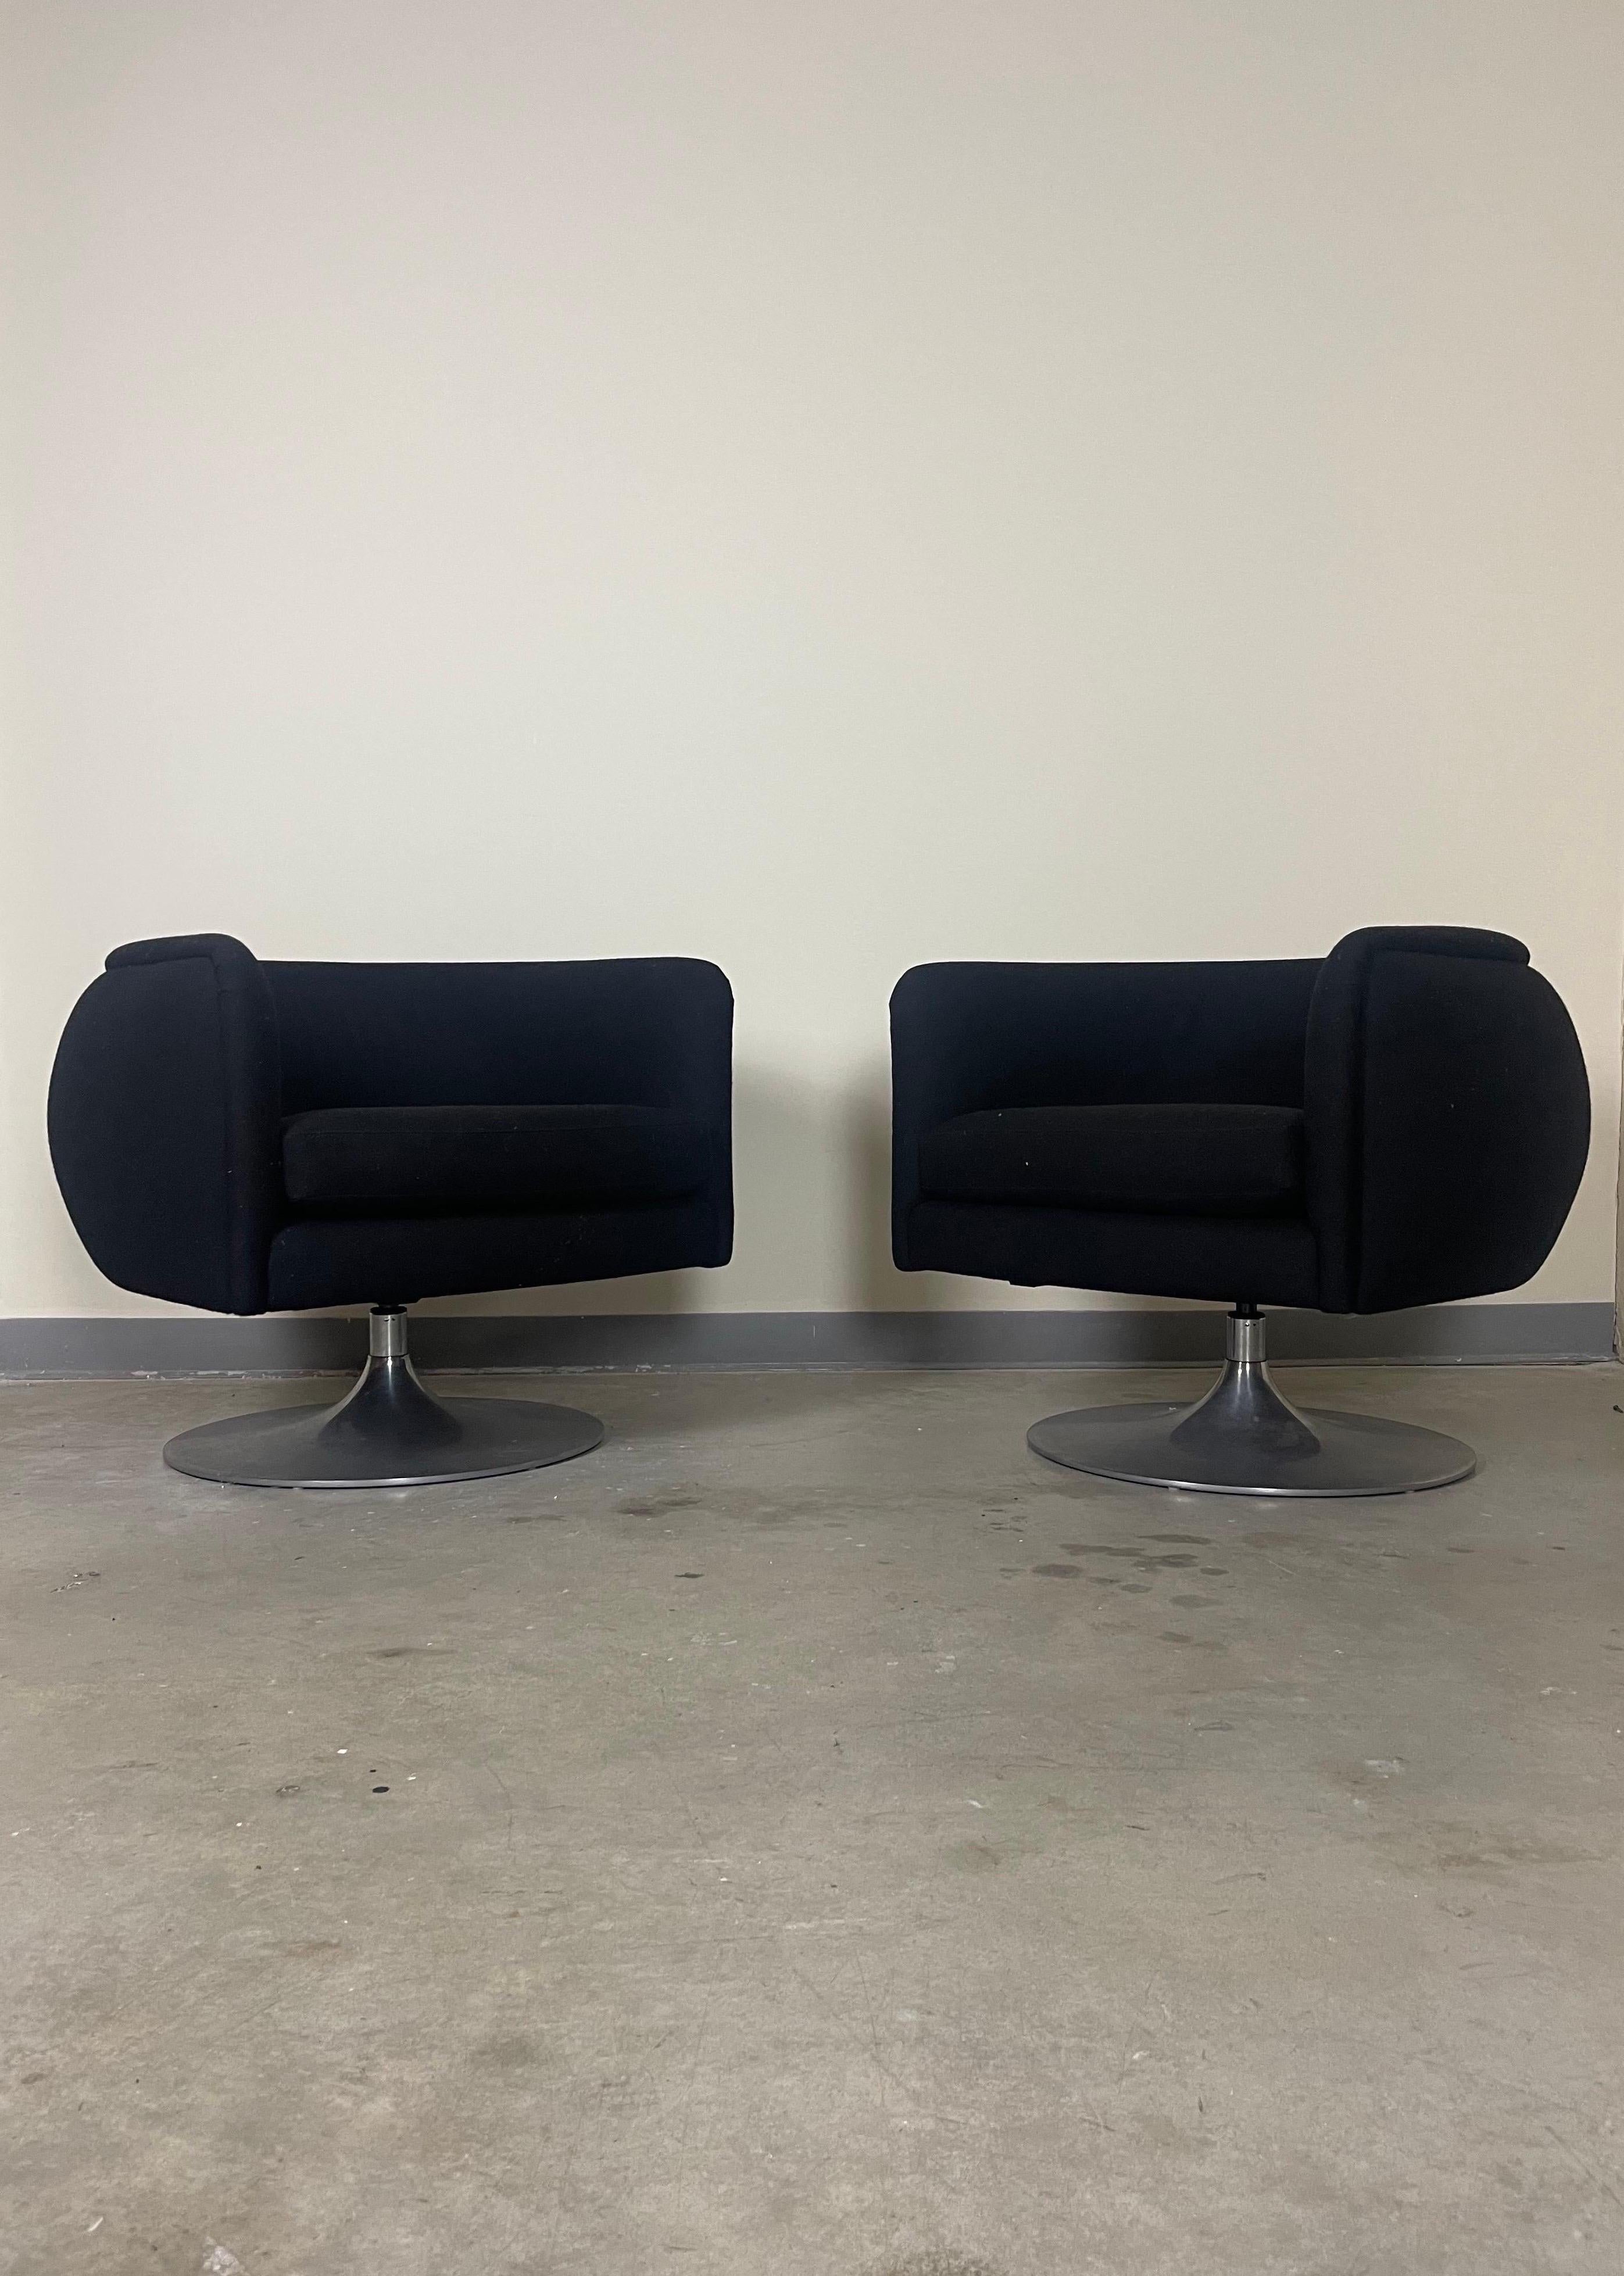 Set of two chairs manufactured by Knoll and designed by Joe D’Urso. Upholstered in black wool. Minor wear to the steel swivel bases. Upholstery is in great condition. Original tags intact.